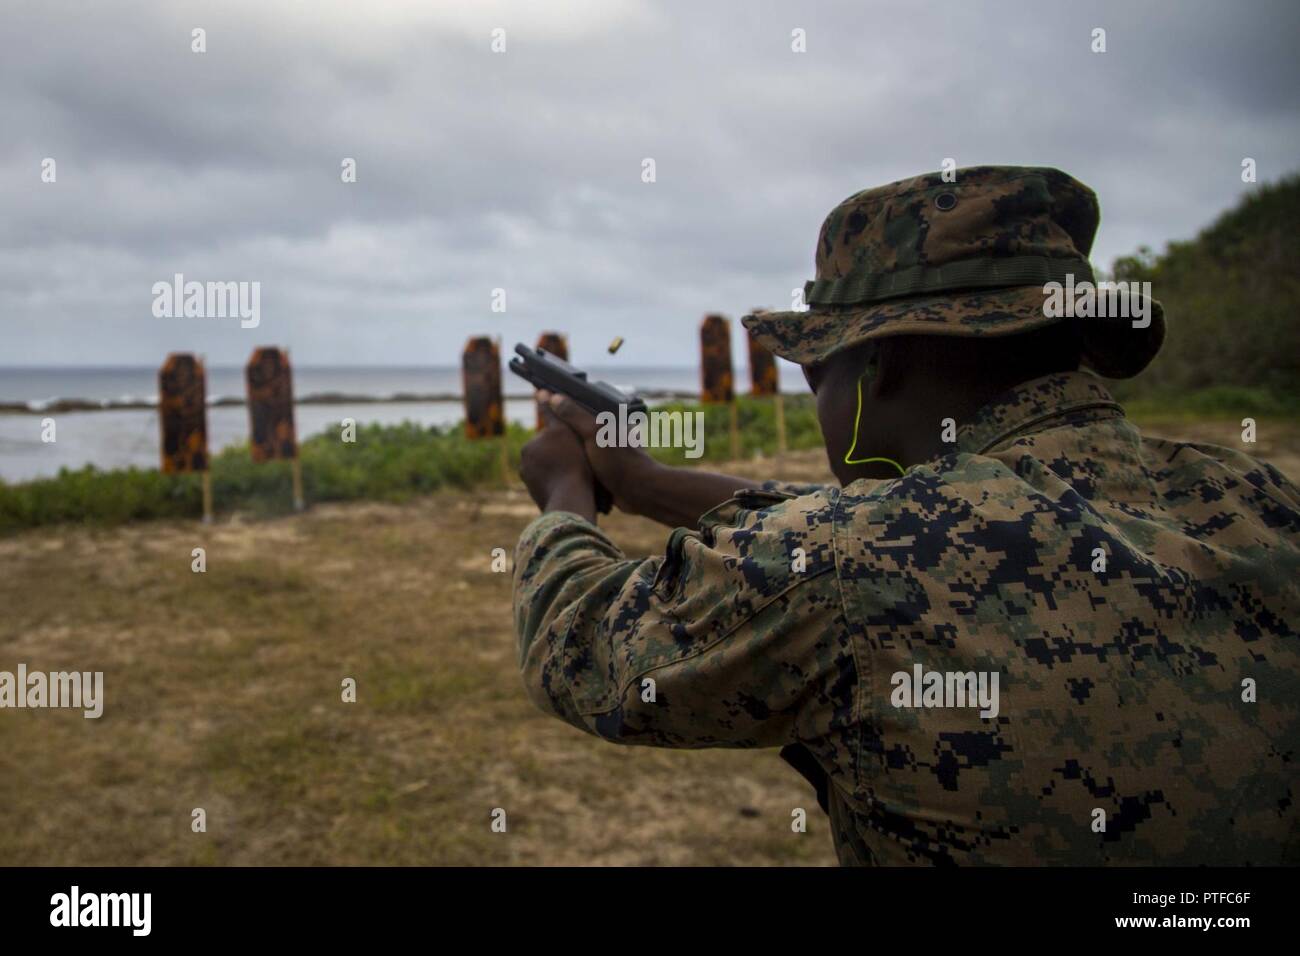 U.S. Marine Corps Lance Cpl. Tyreke Wiggins, a mortarman with 3rd Battalion 4th Marines attached to Task Force Koa Moana 17, fires a glock 17 during Exercise TAFAKULA, on Tongatapu Island, Tonga, July 21, 2017. Exercise TAFAKULA is designed to strengthen the military-to-military, and community relations between Tonga’s His Majesty’s Armed Forces, French Army of New Caledonia, New Zealand Defense Force, and the United States Armed Forces. Stock Photo